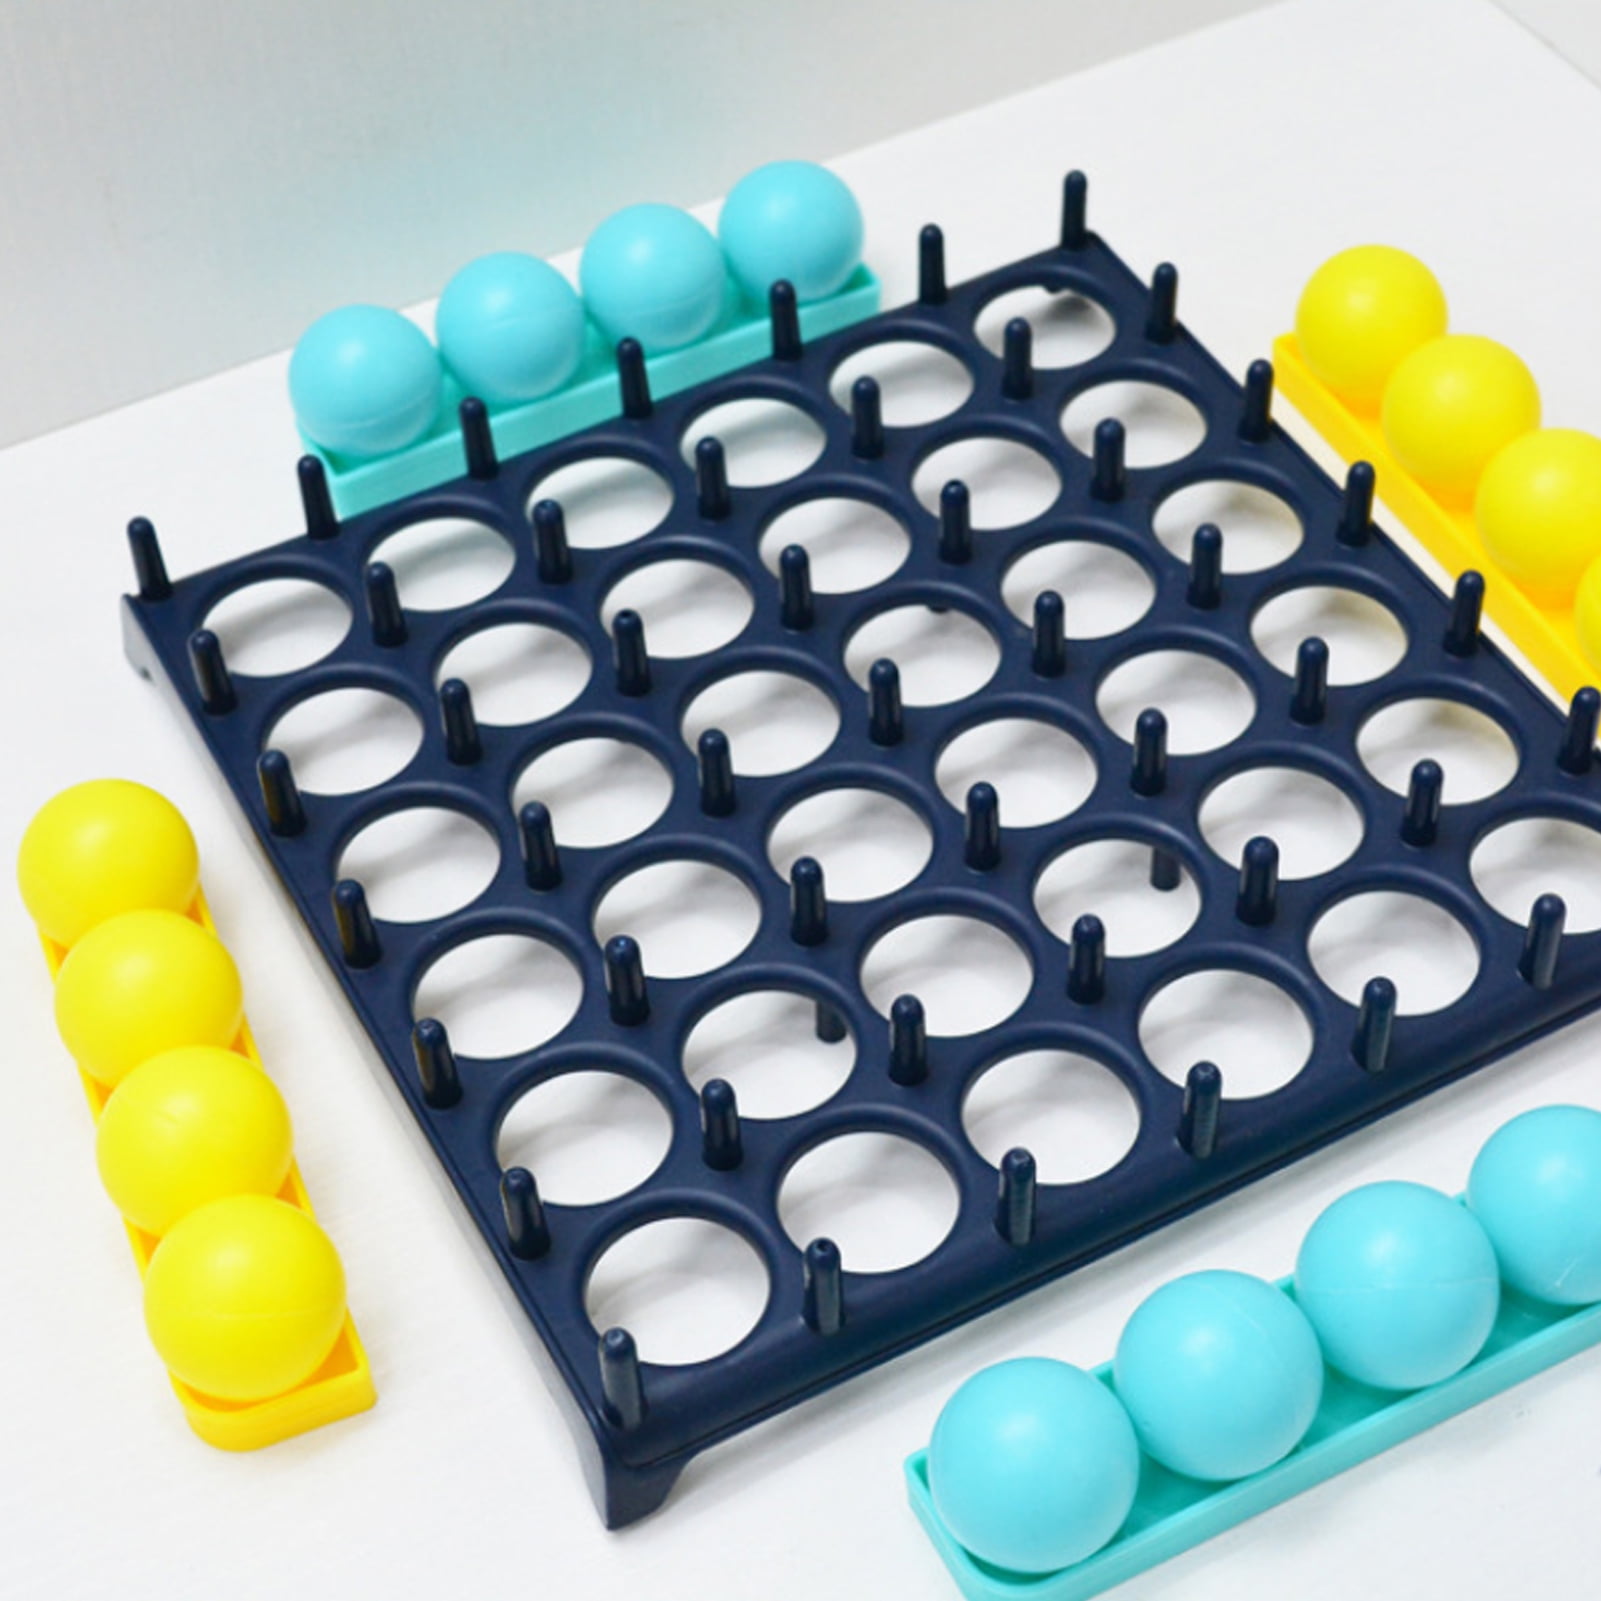 Details about   Spinning Top Classic Table Game Educational Bath Teeth Toys New Party Gifts 